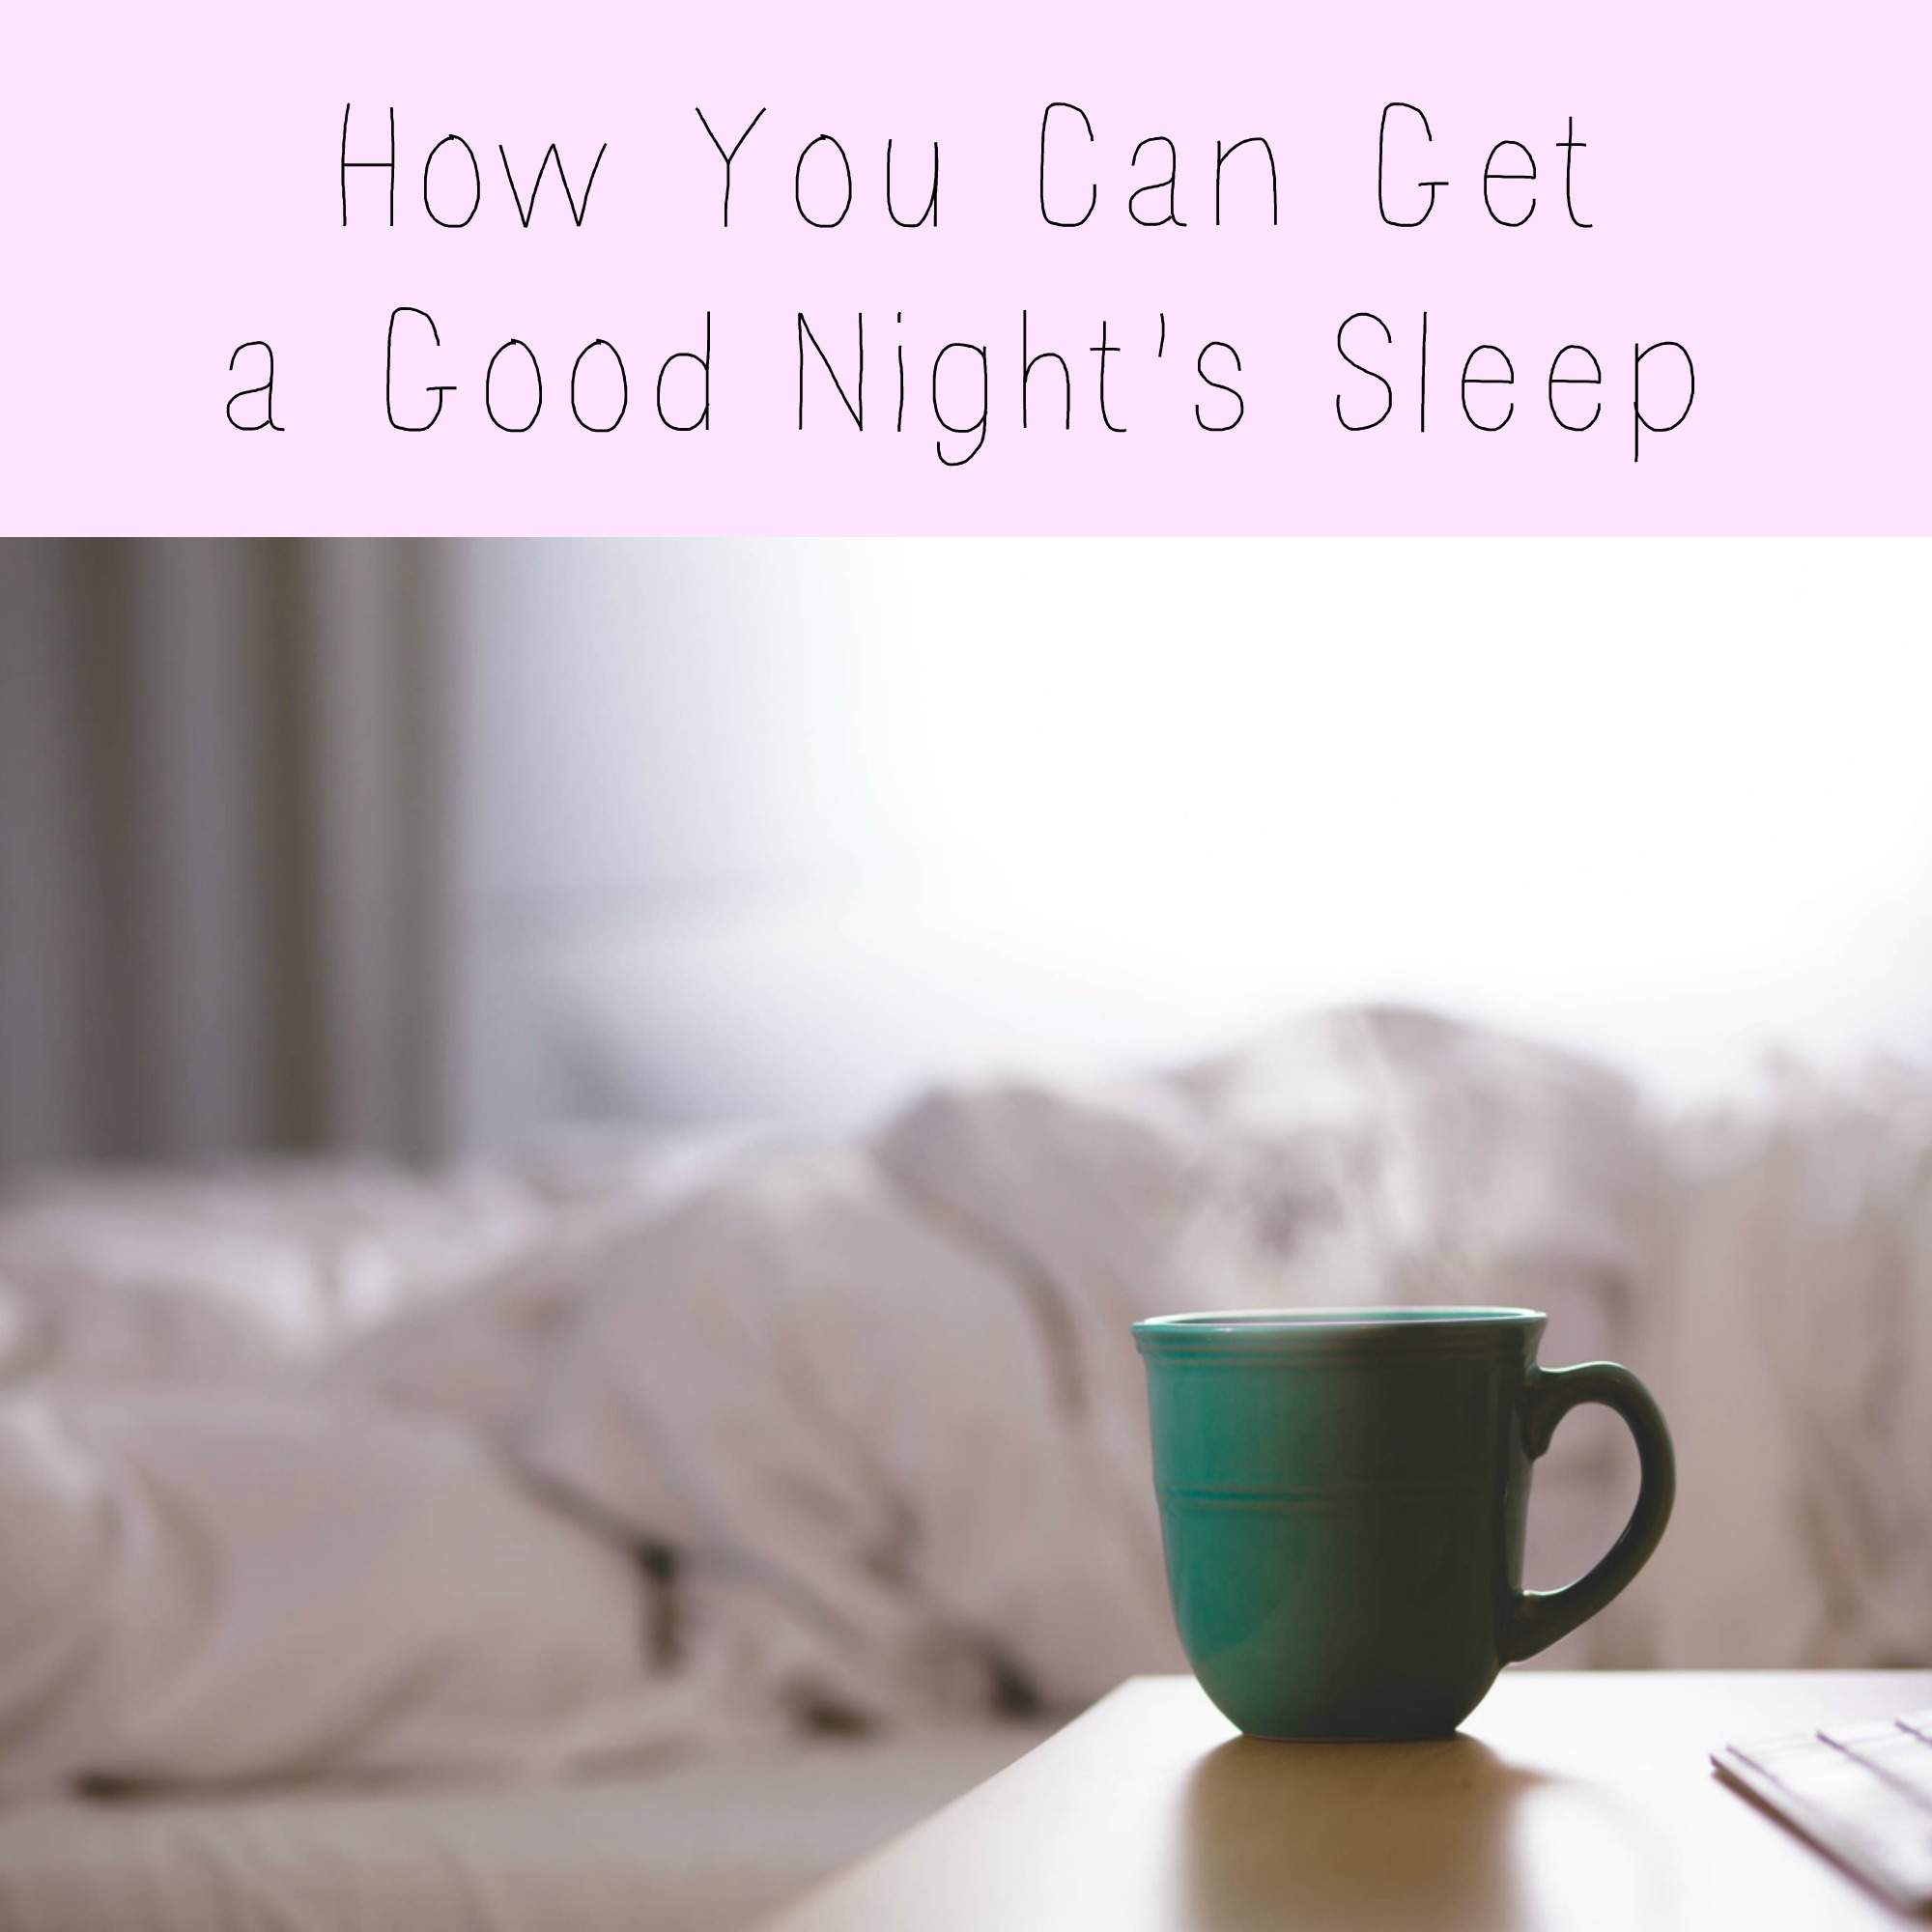 How You Can Get a Good Night's Sleep